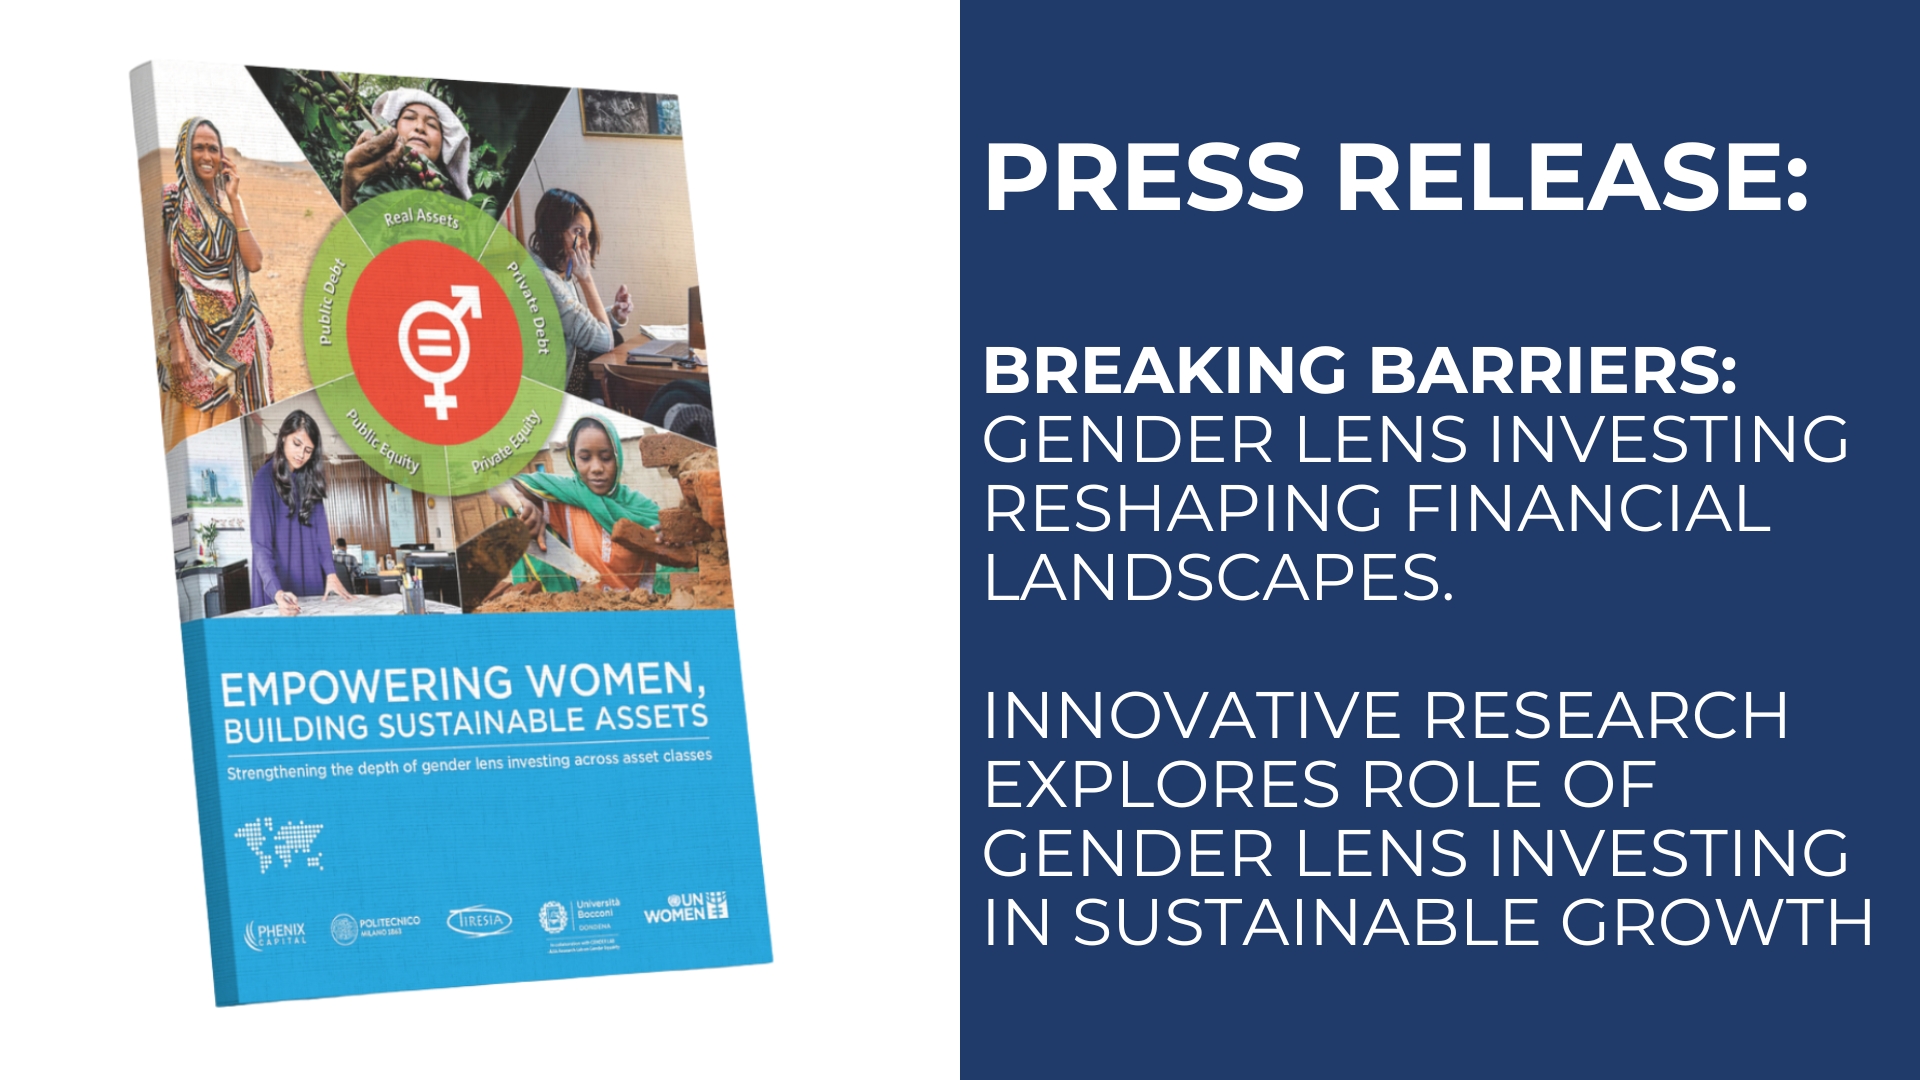 PRESS RELEASE: Breaking Barriers: Gender Lens Investing Reshaping Financial Landscapes. Innovative research explores role of gender lens investing in sustainable growth